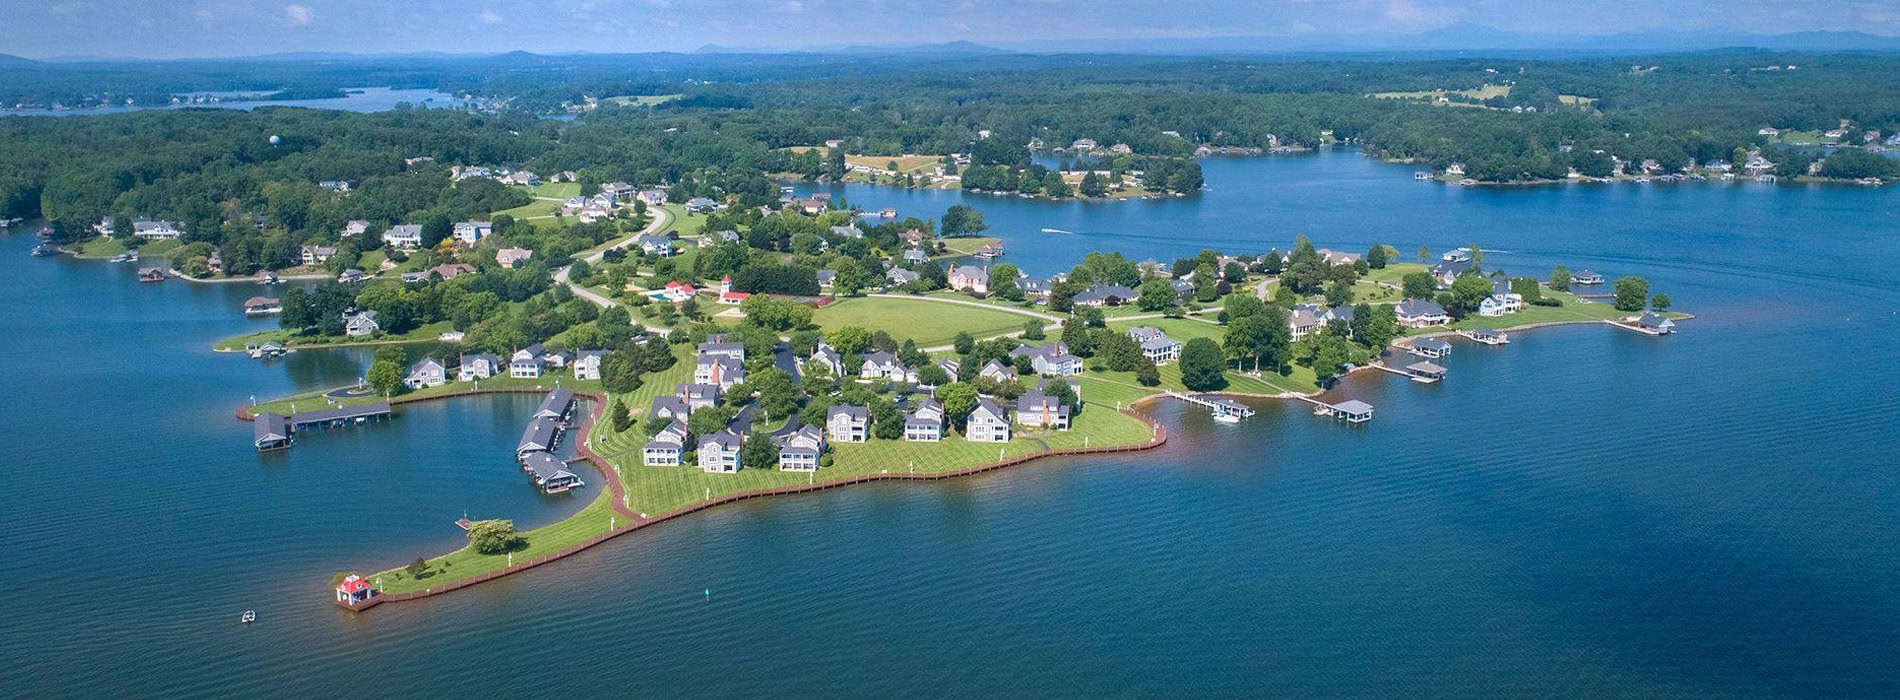 Aerial view of cottages at The Boardwalk, a neighborhood at Smith Mountain Lake, VA. 
